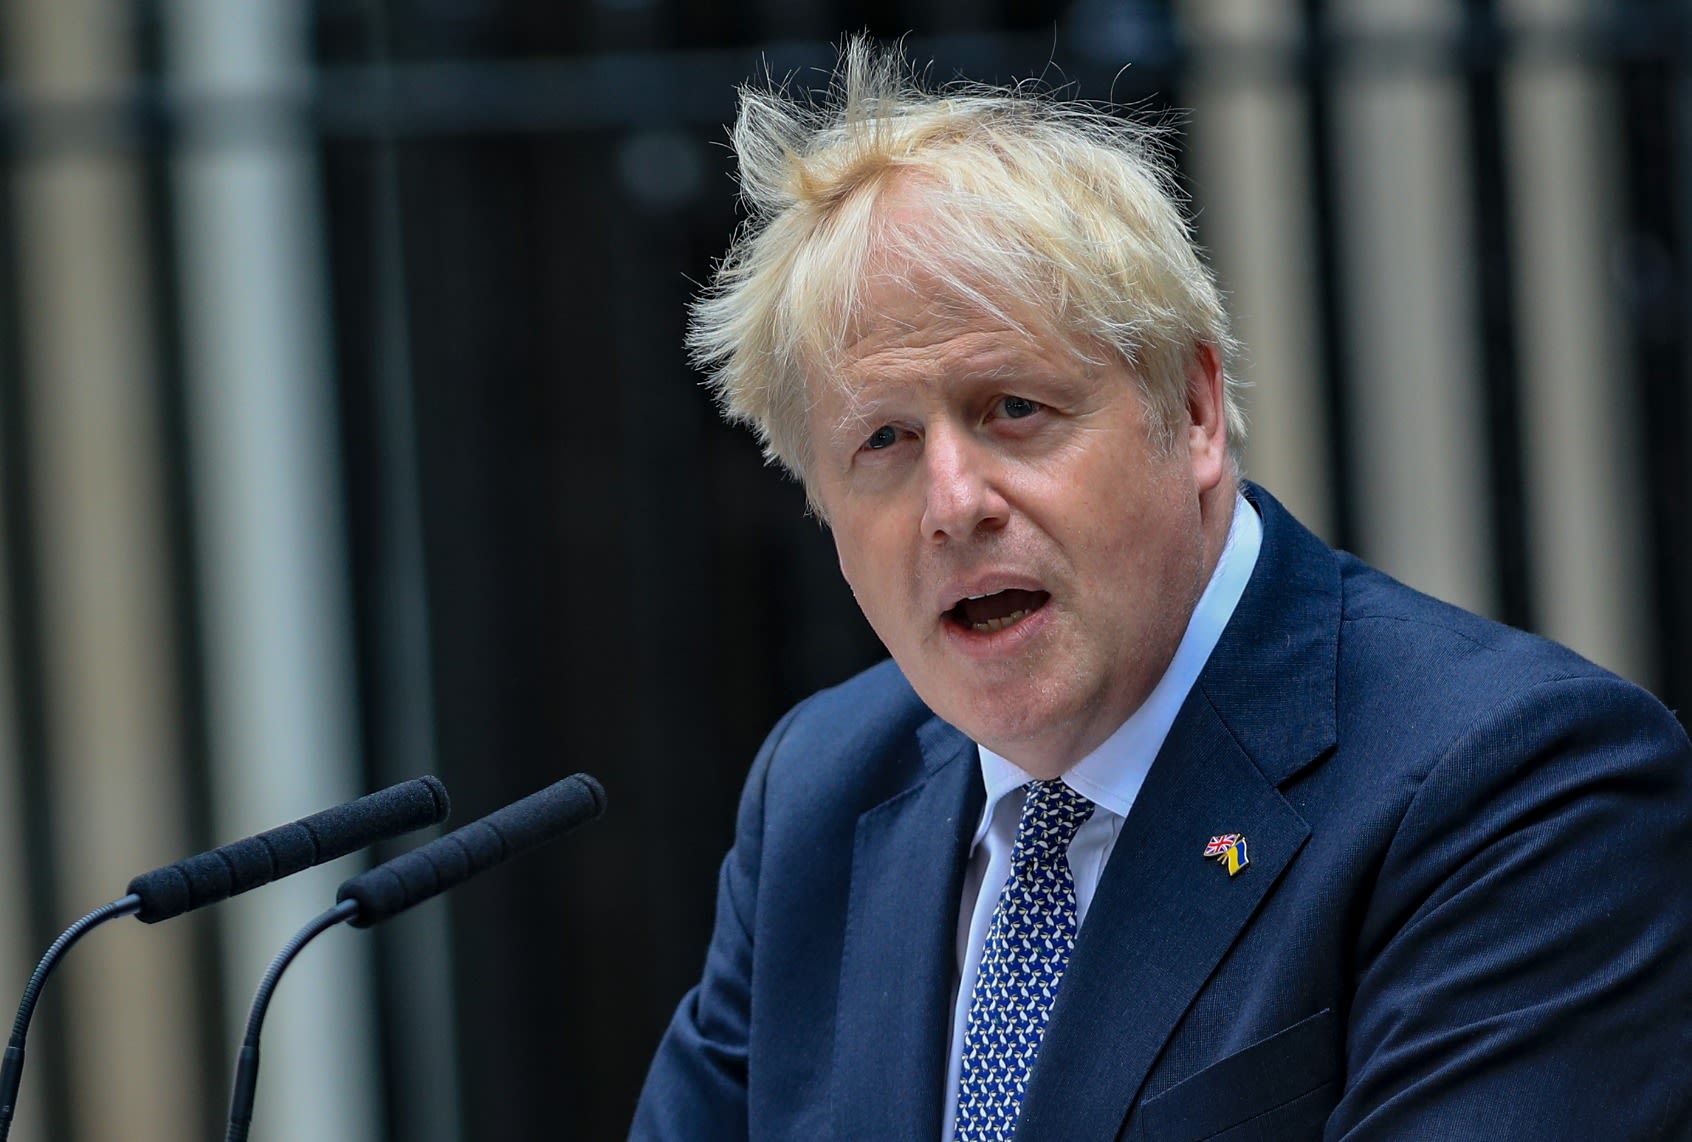 Boris Johnson couldn't cast vote without photo ID, due to his own election integrity law